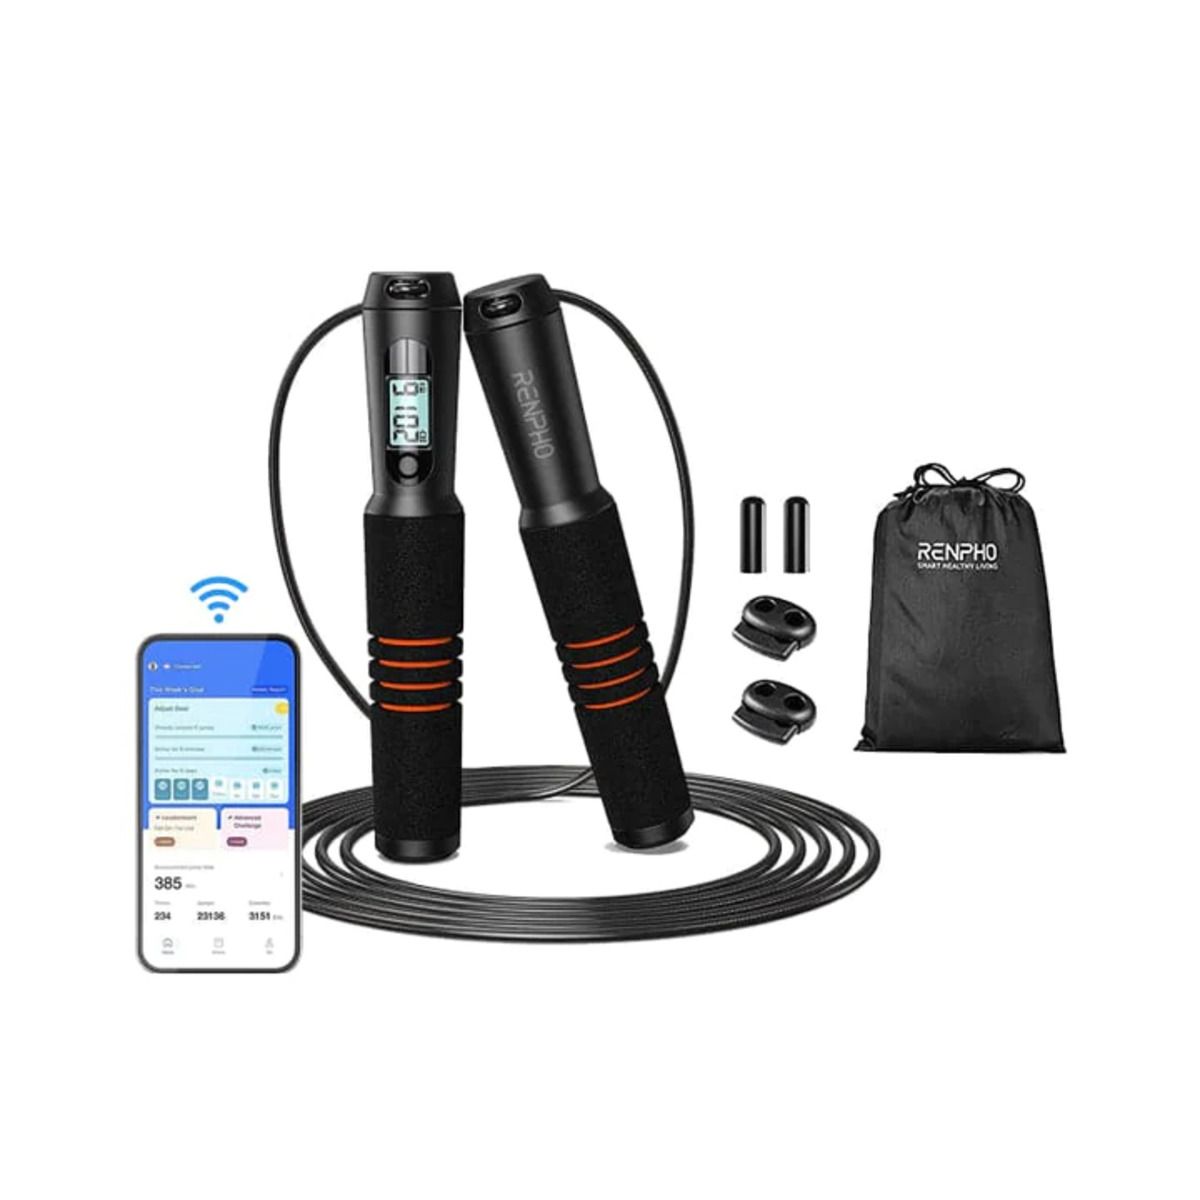 The Renpho Jump Rope, its accessories, and a smartphone against a white background